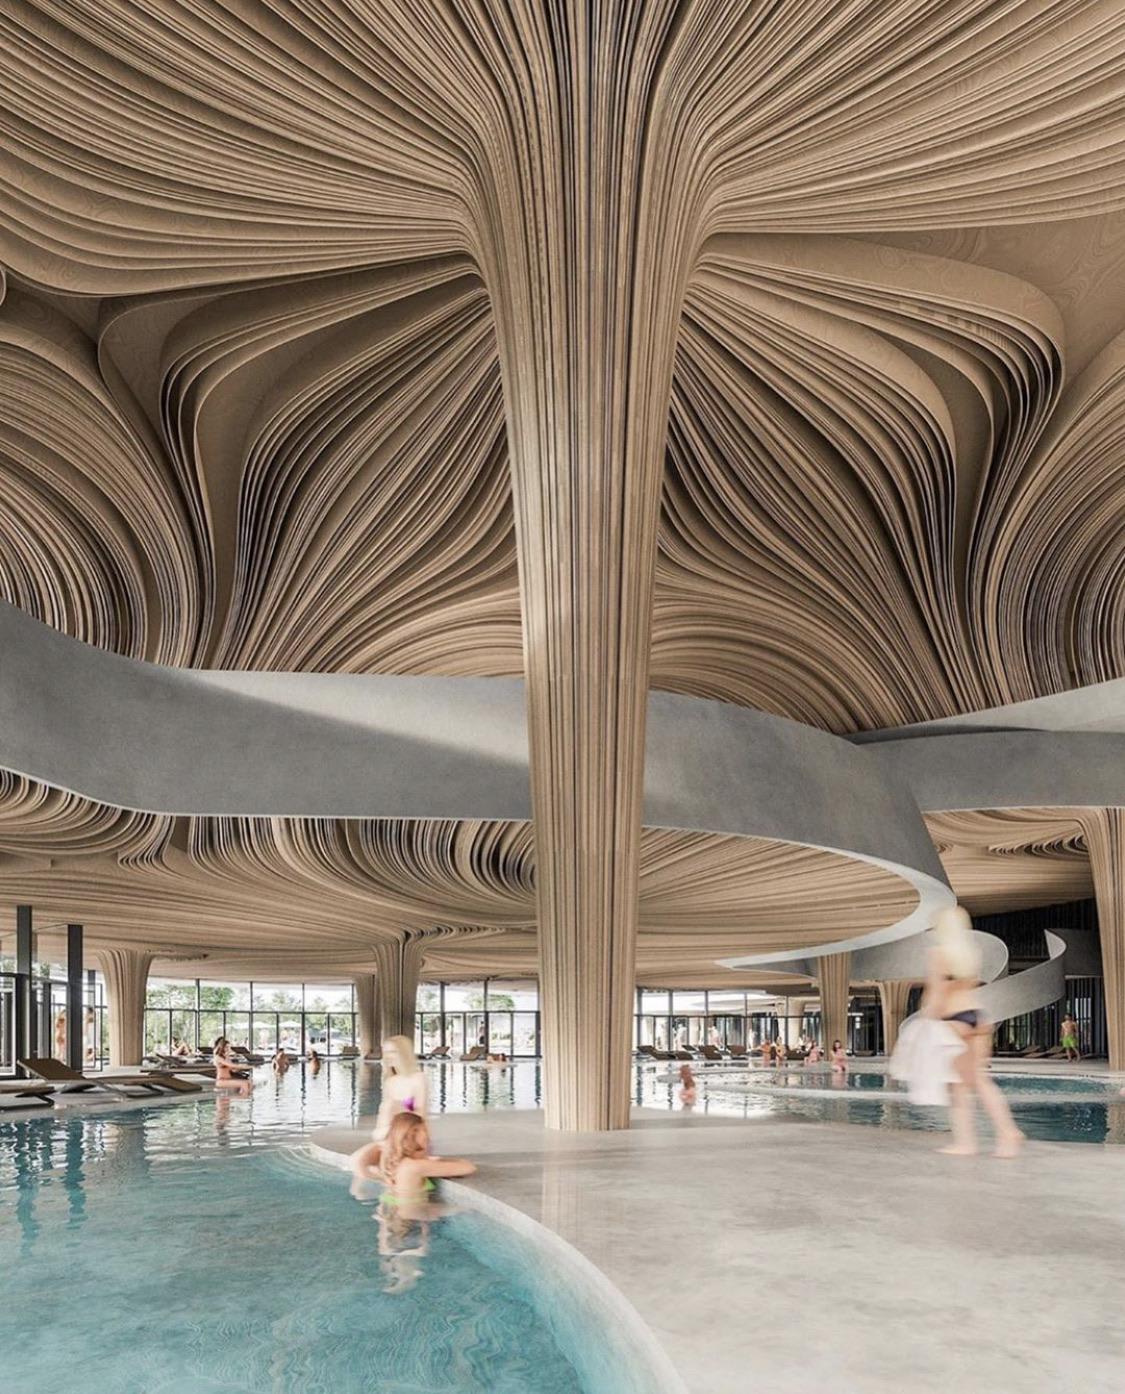 This swimming pool ceiling